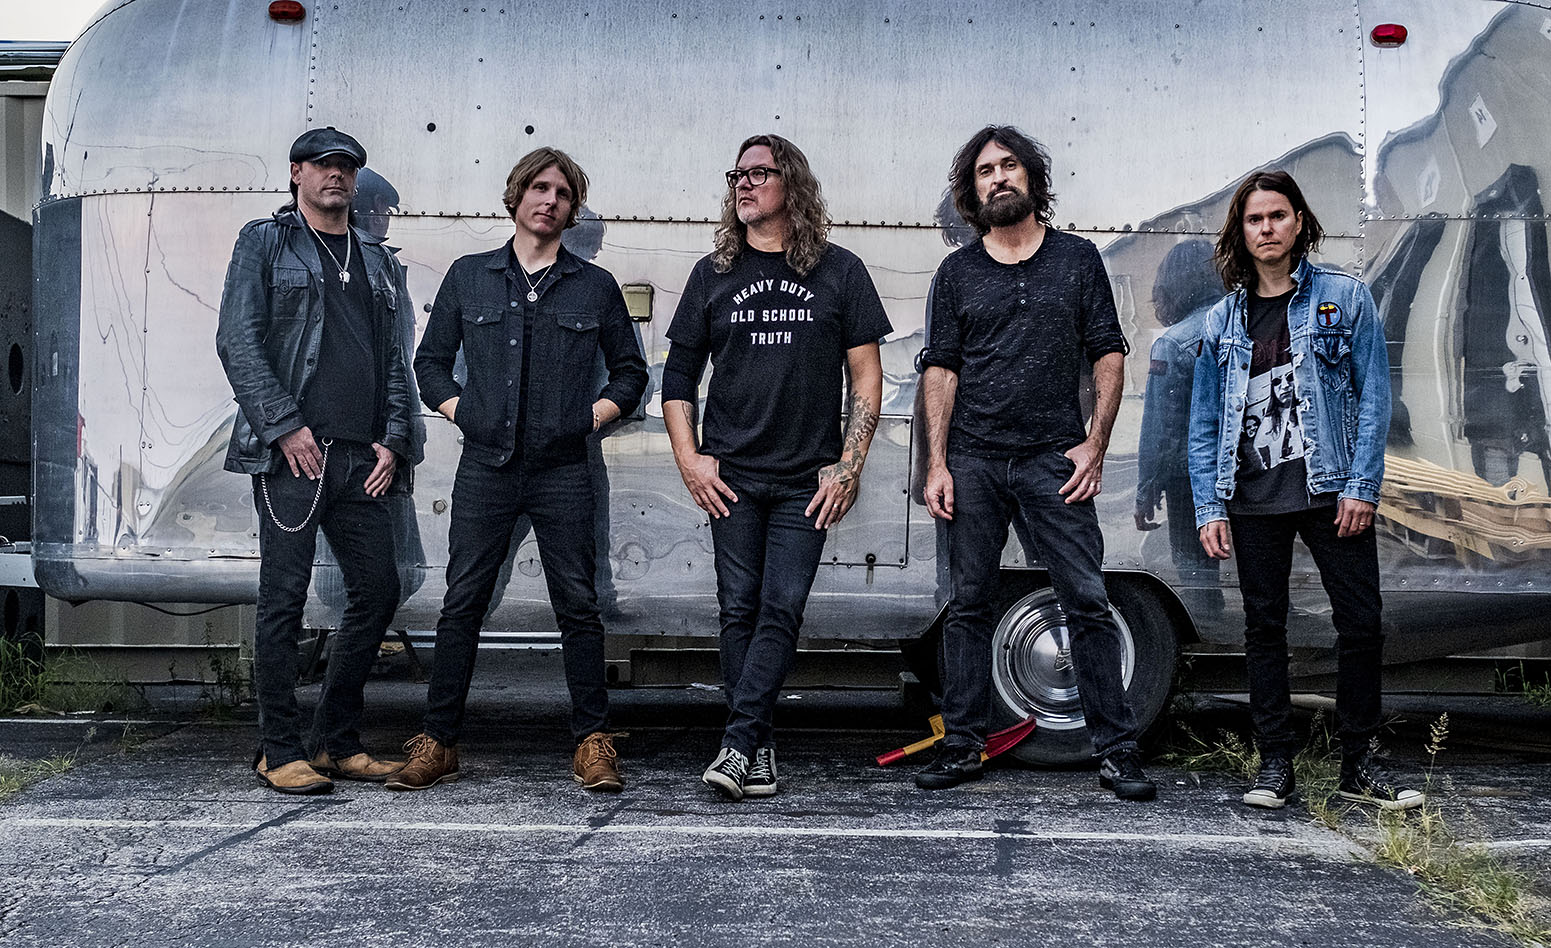 Martin (center) and Candlebox